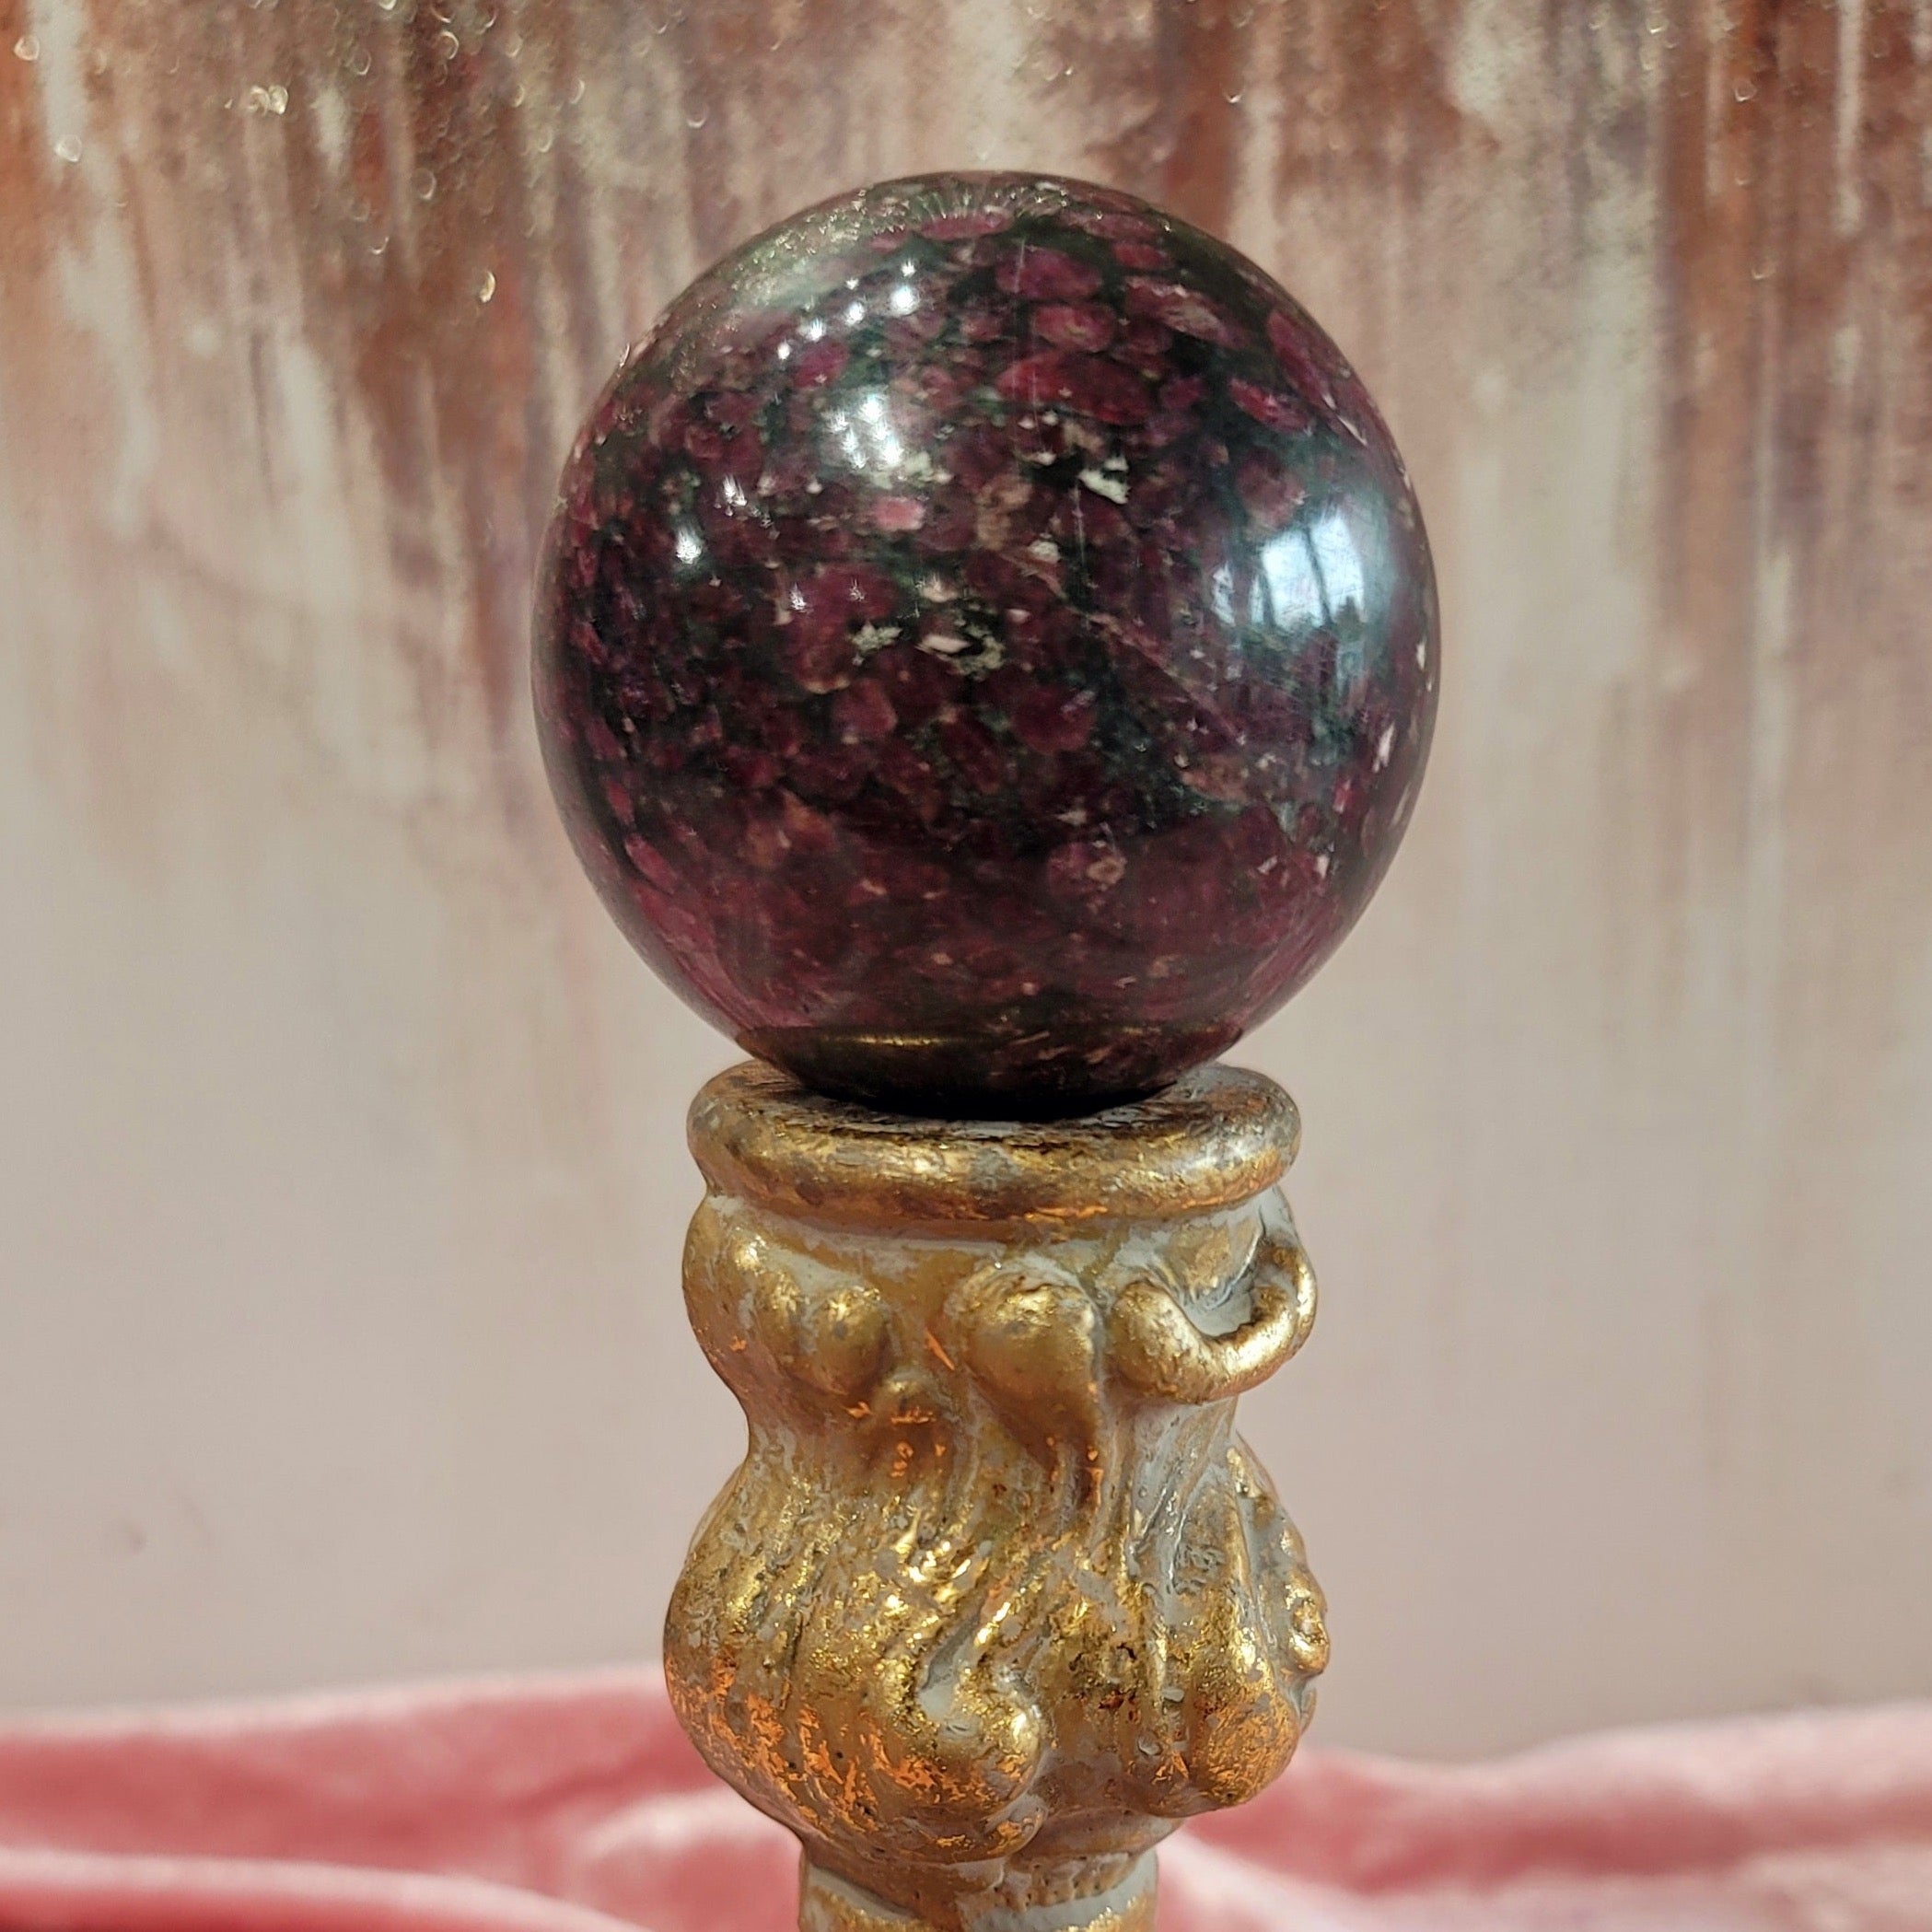 Eudialyte Sphere for Emotional Healing and Releasing Negativity